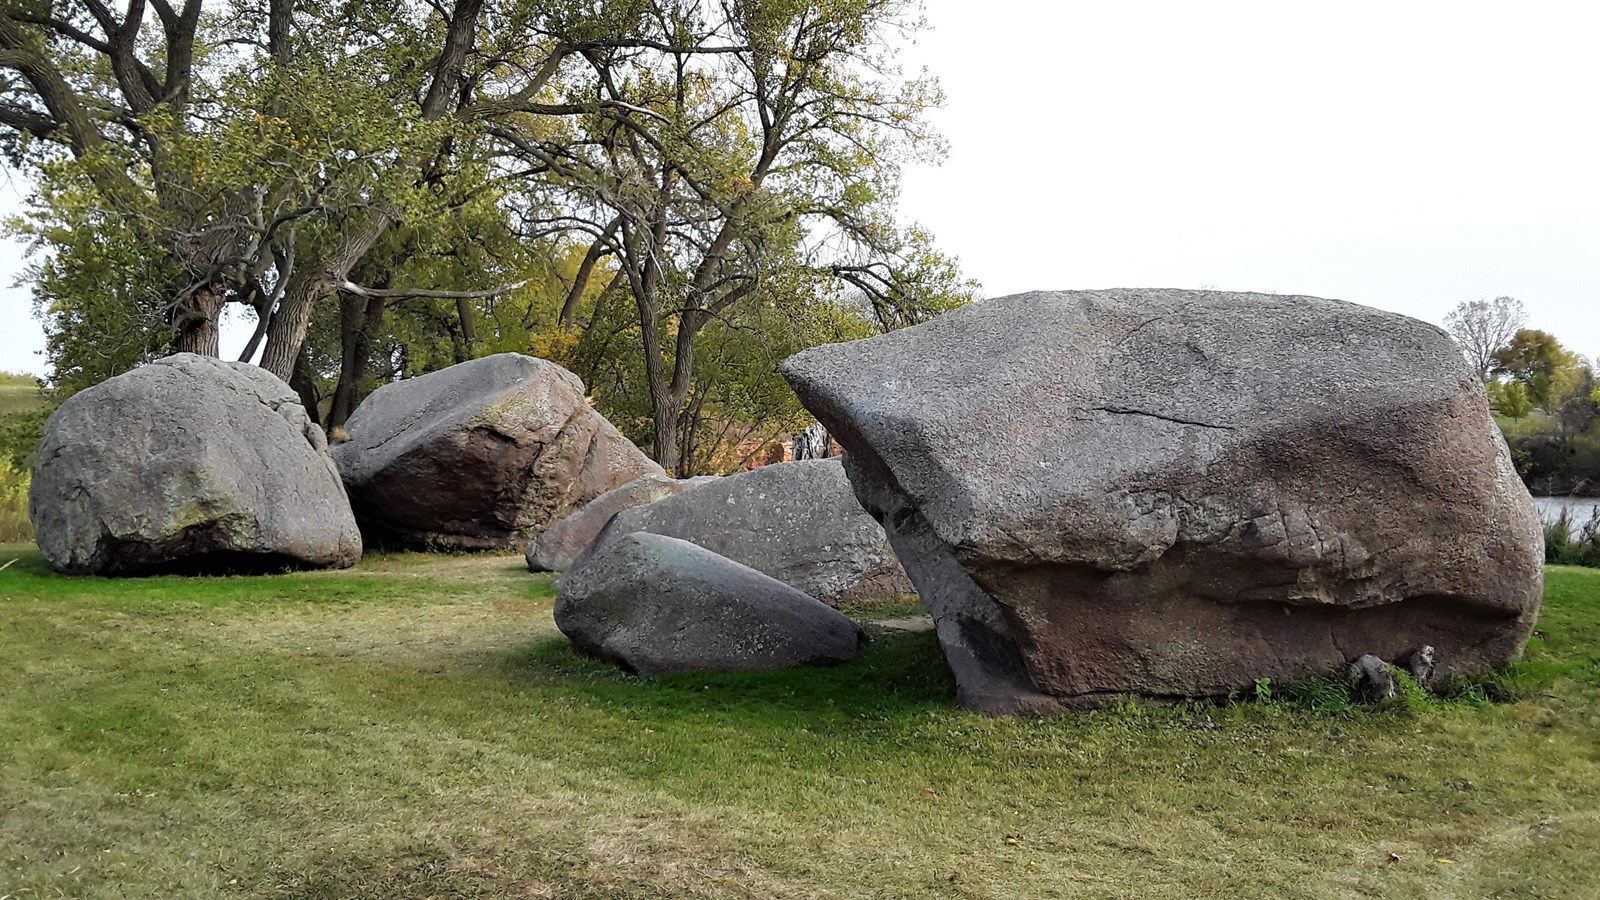 Cluster of giant boulders in a cluster on grass next to a tree